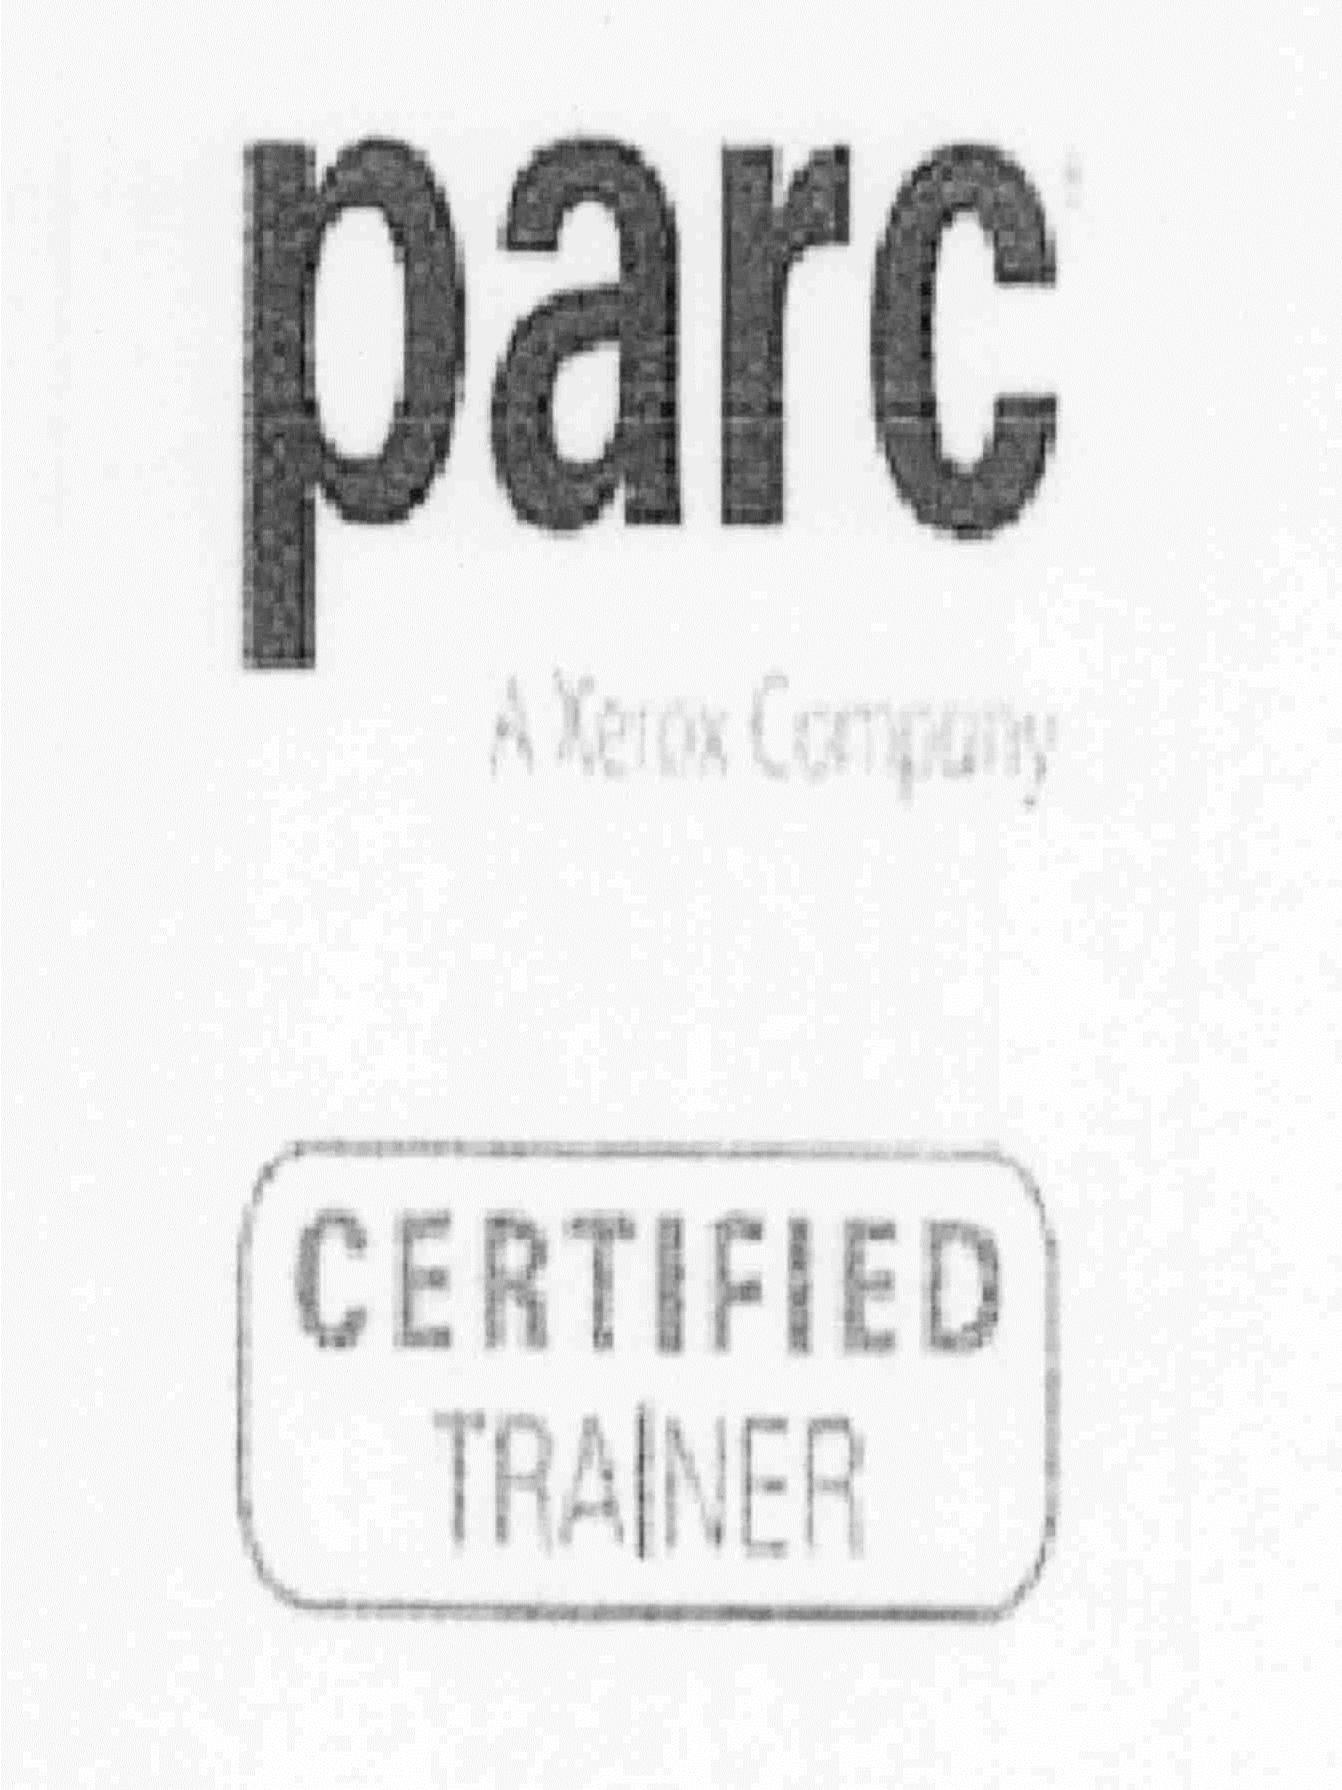  PARC A XEROX COMPANY CERTIFIED TRAINER